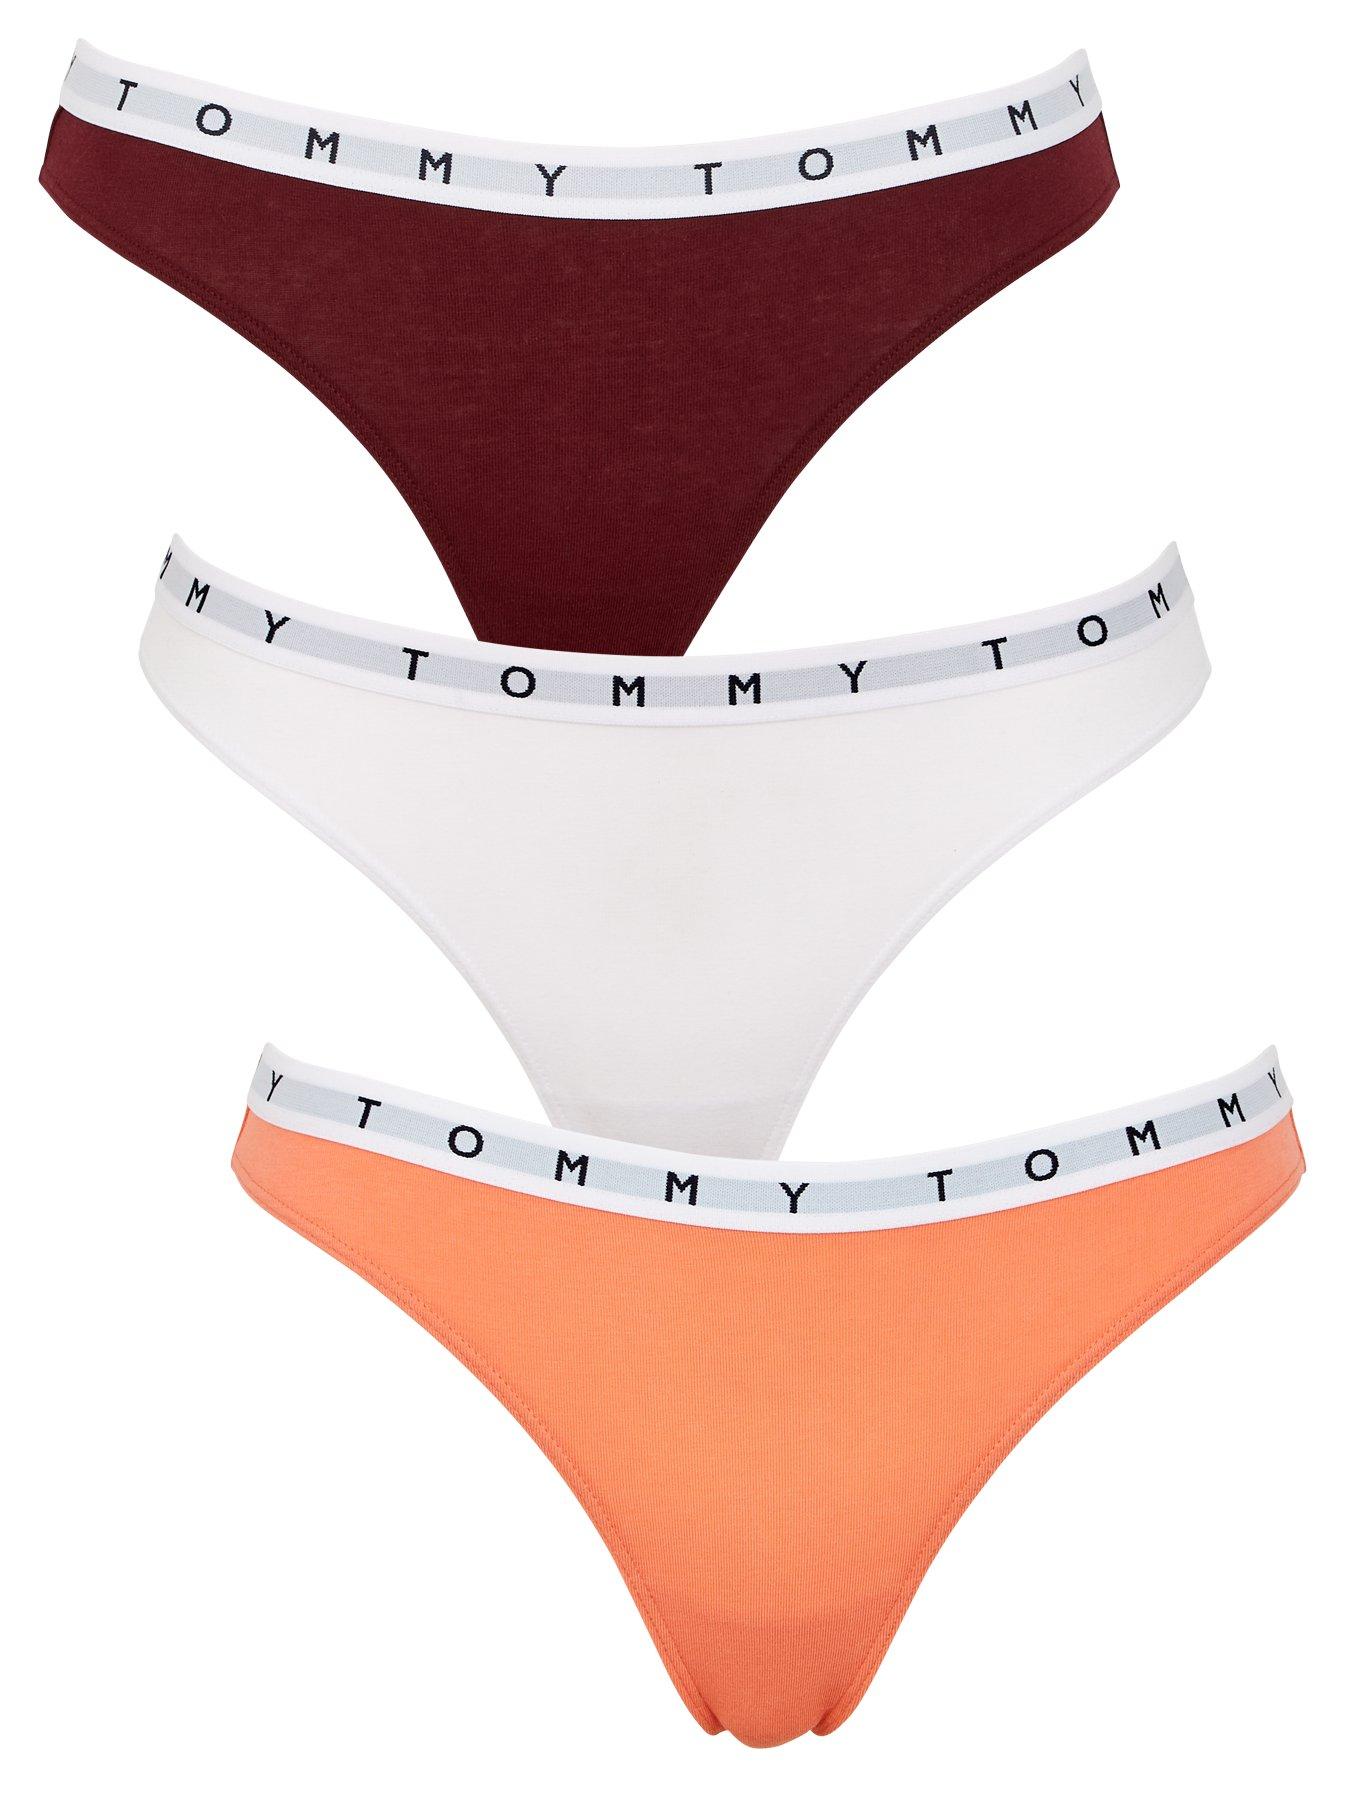 Tommy Hilfiger Women's Cotton Fabric Thong Underwear Panties Multi-Pack 